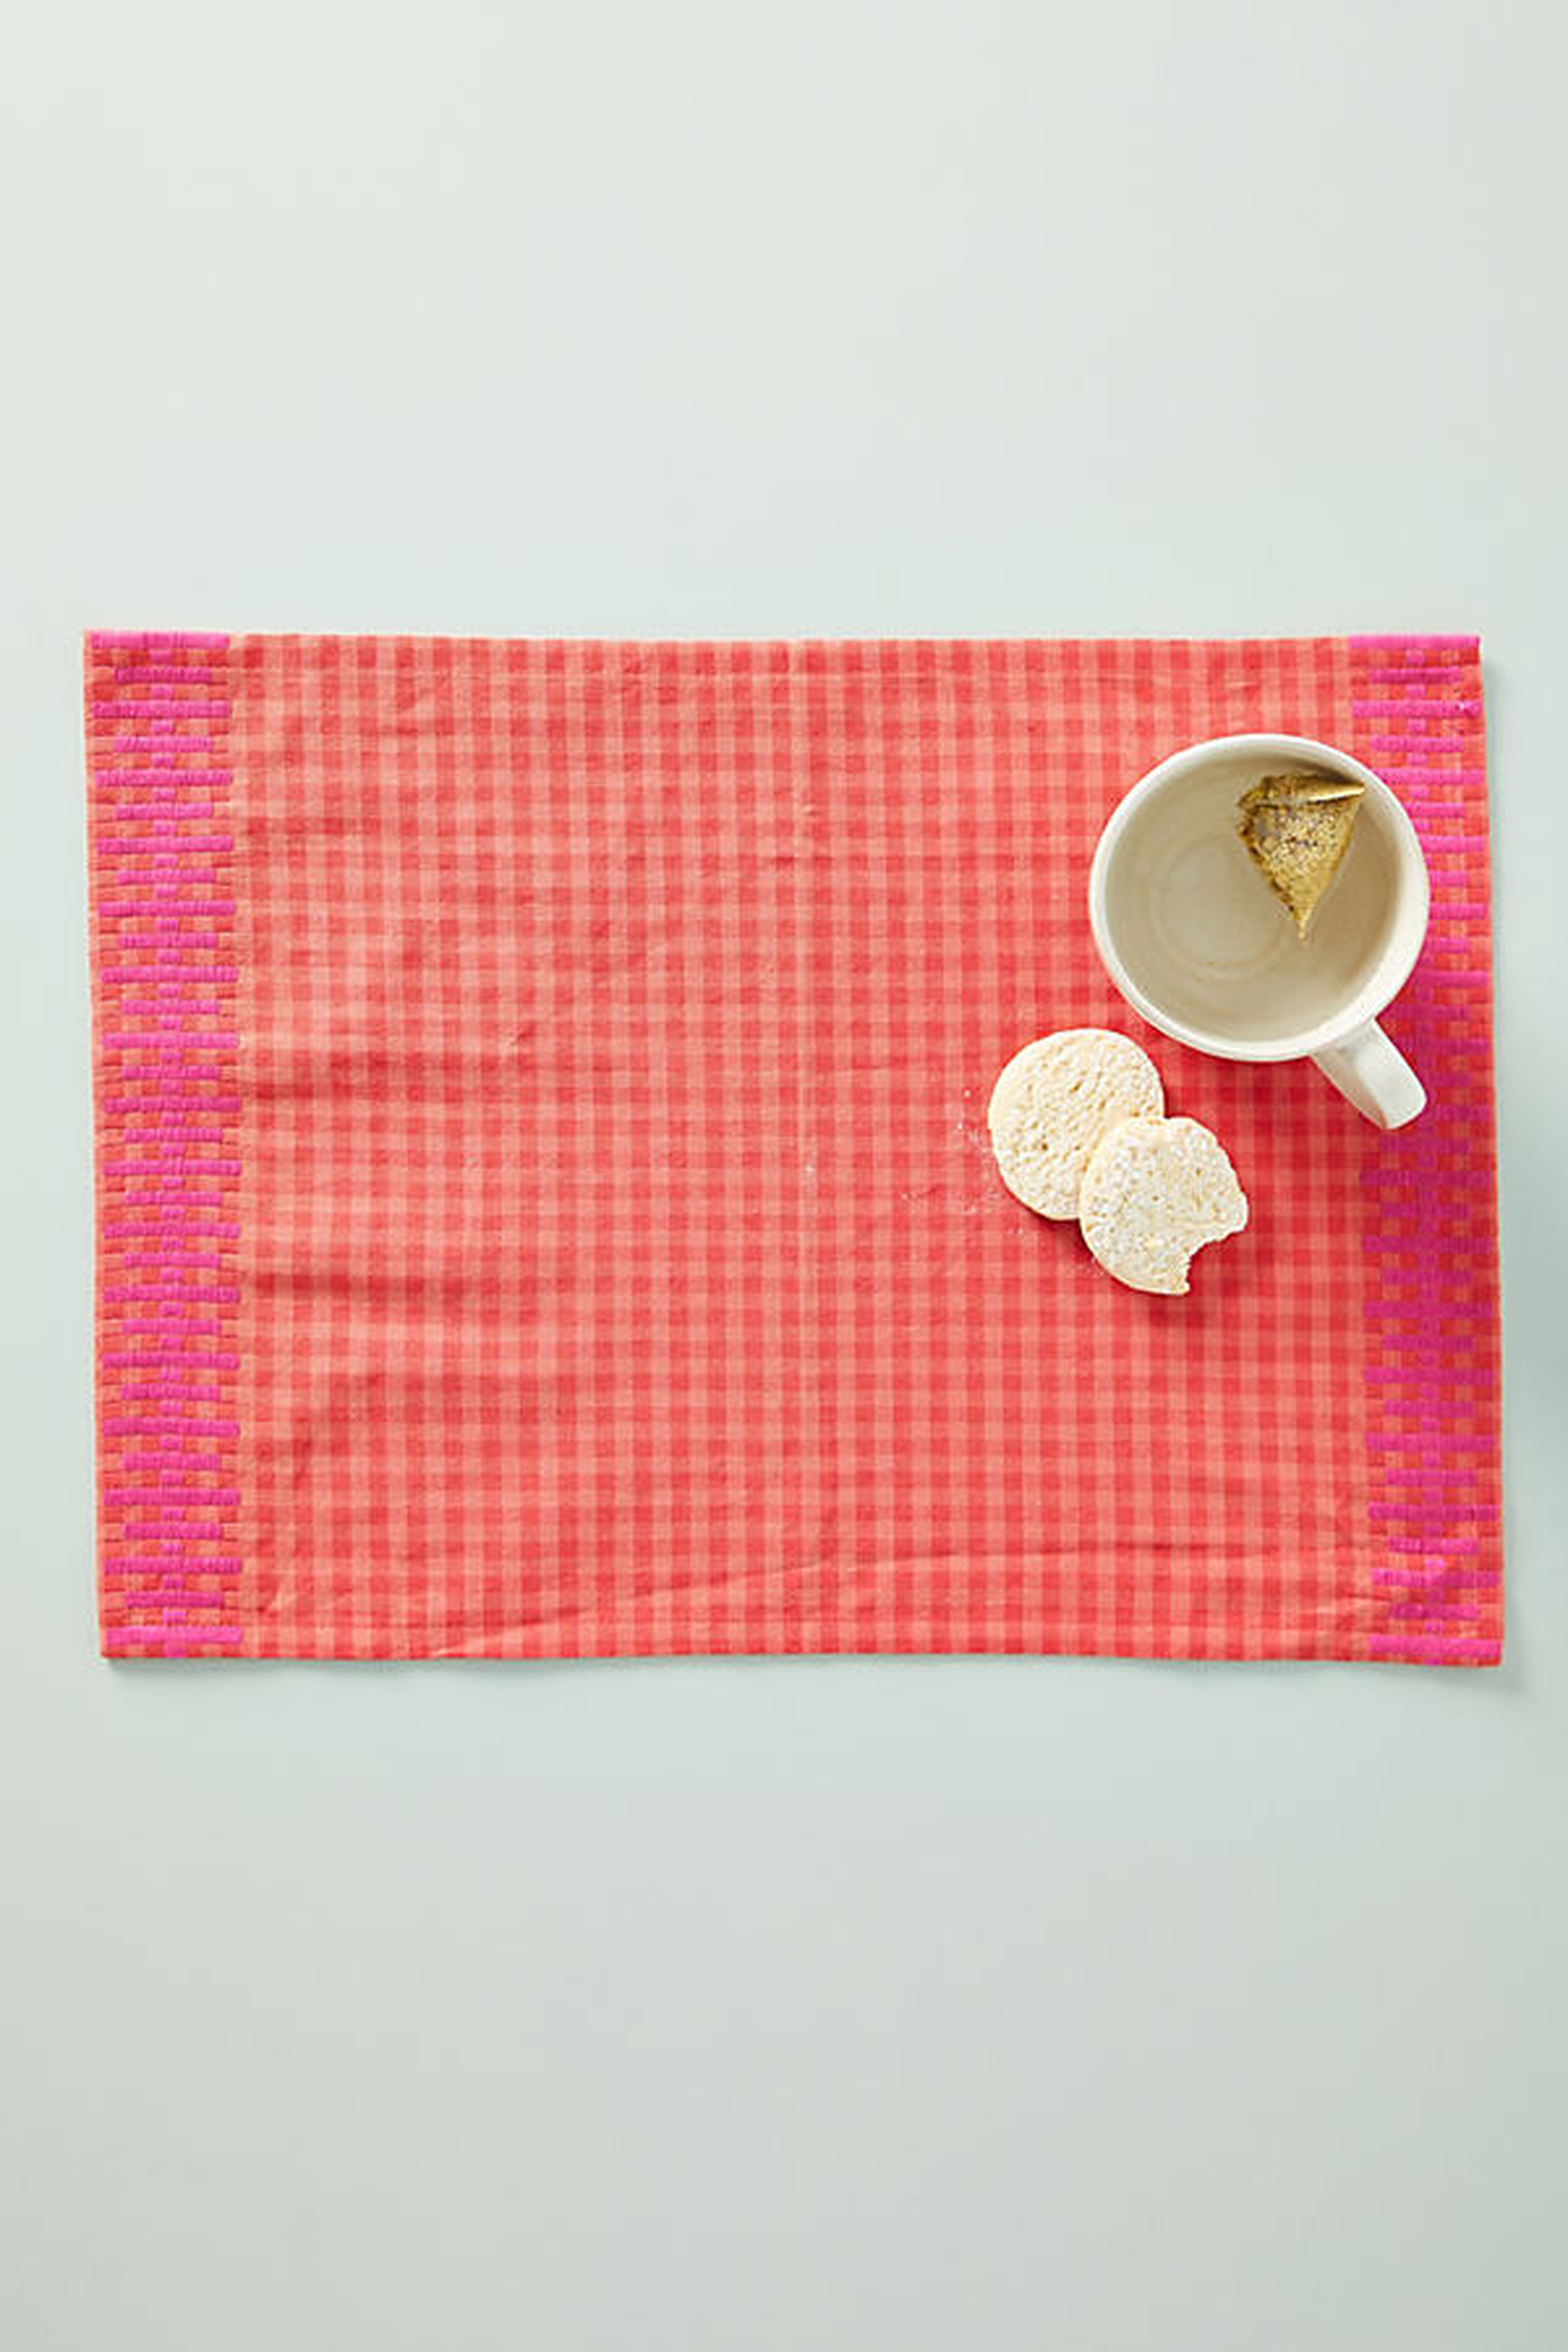 Posie Gingham Placemat By Anthropologie in Pink Size PLACEMAT - Anthropologie